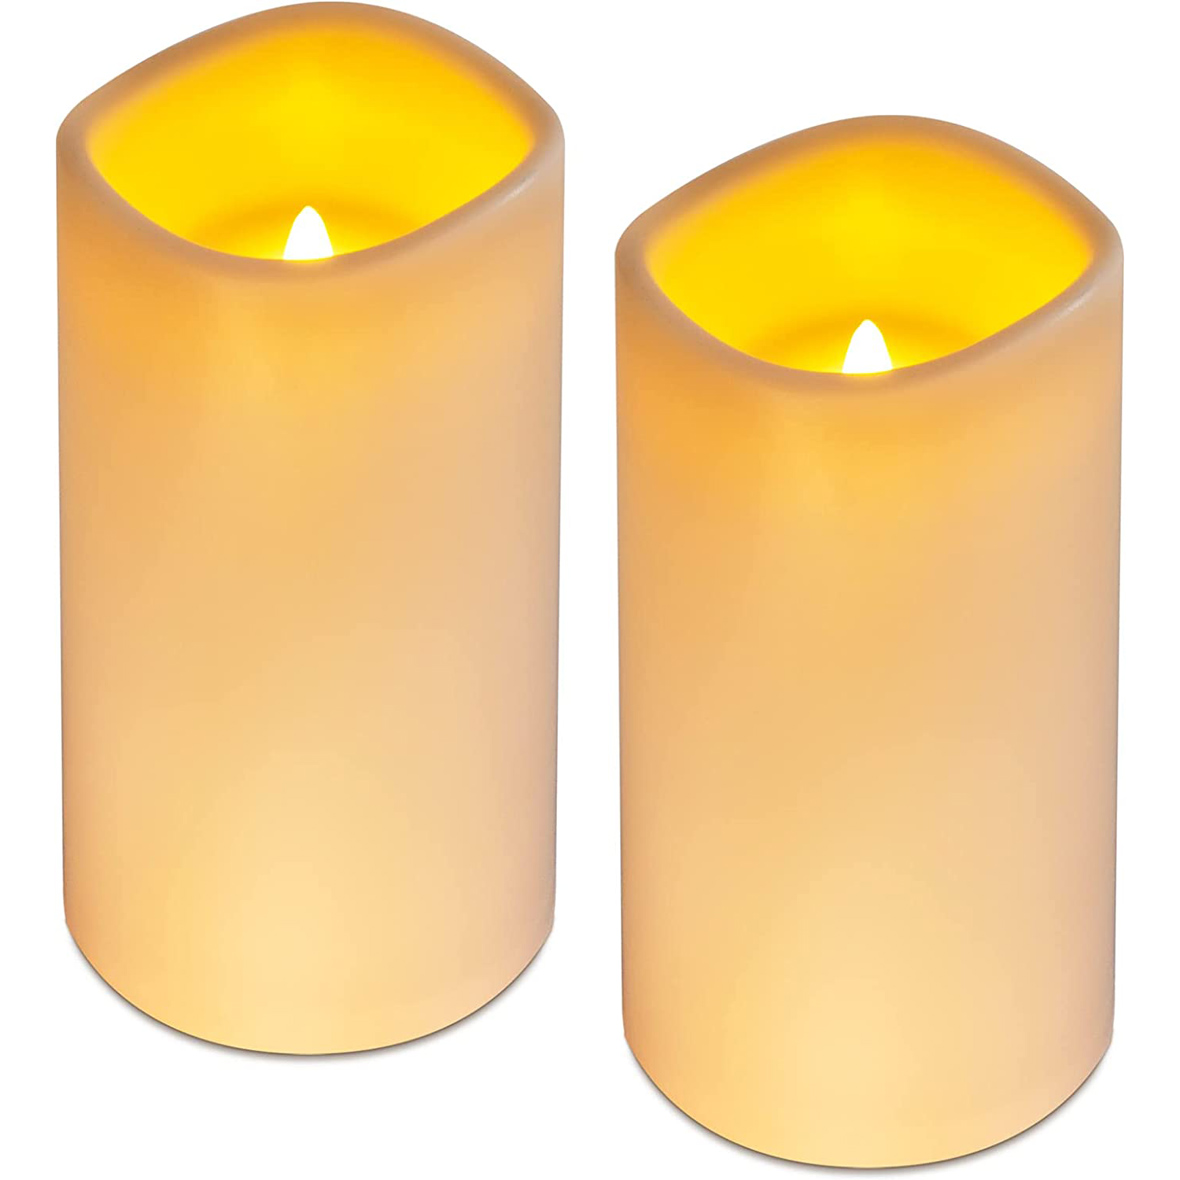 Yongmao 4.5" x 9" Large Solar Candles Outdoor Waterproof, Flameless Pillar LED Rechargeable Candle Set, Dusk to Dawn Solar Powered Pathway Lights for Outdoor Lanterns Patio Decor, Set of 2